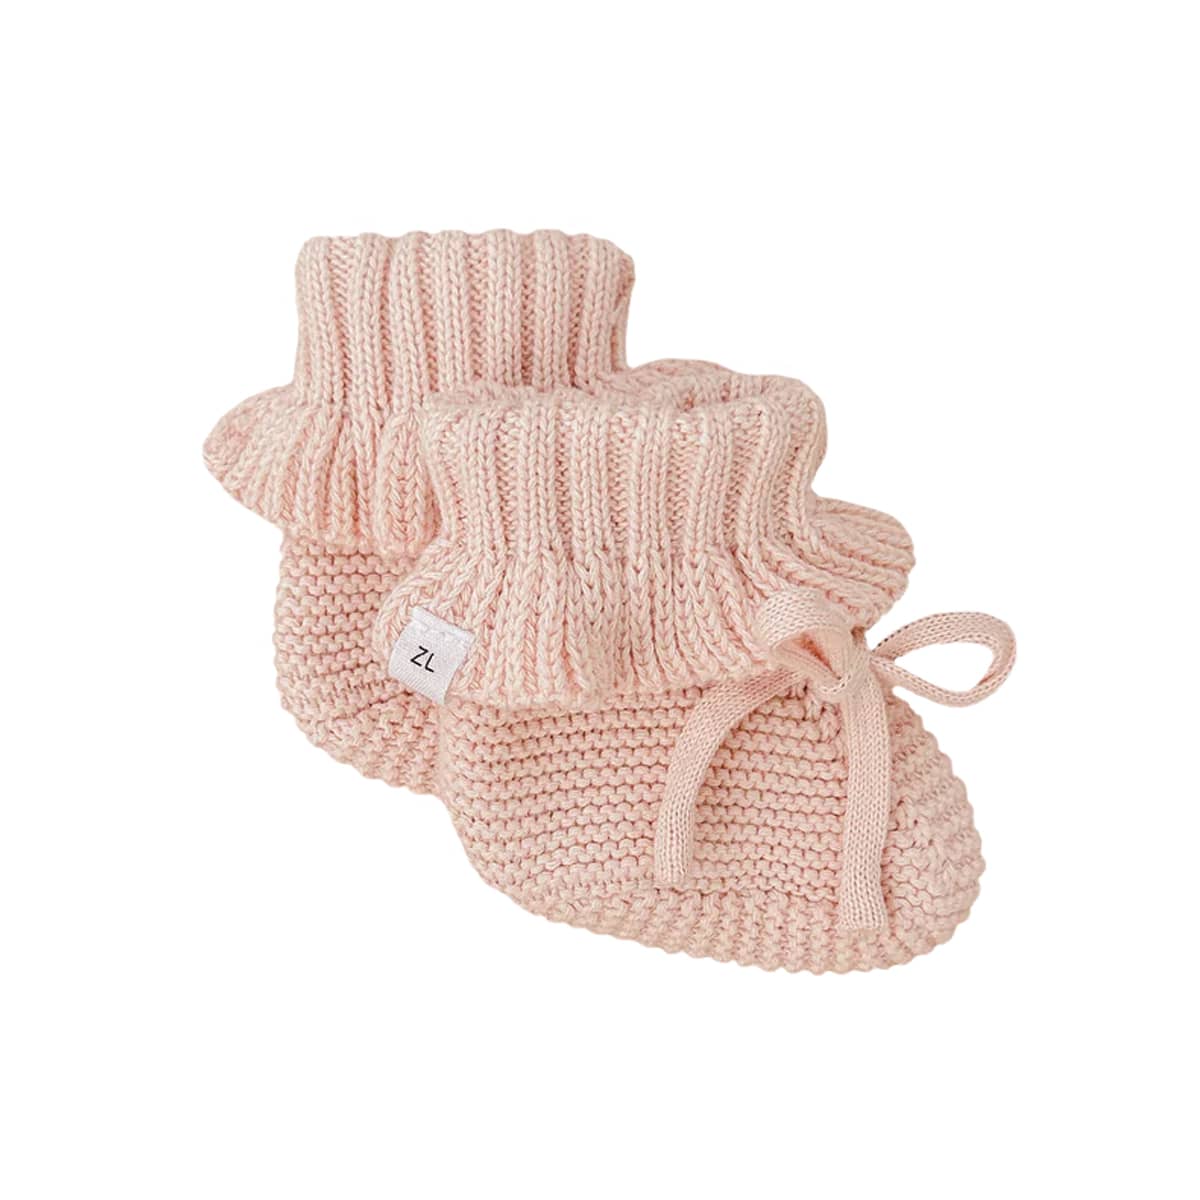 Ziggy Lou Textured Chunky Knit Booties - Pia Frill